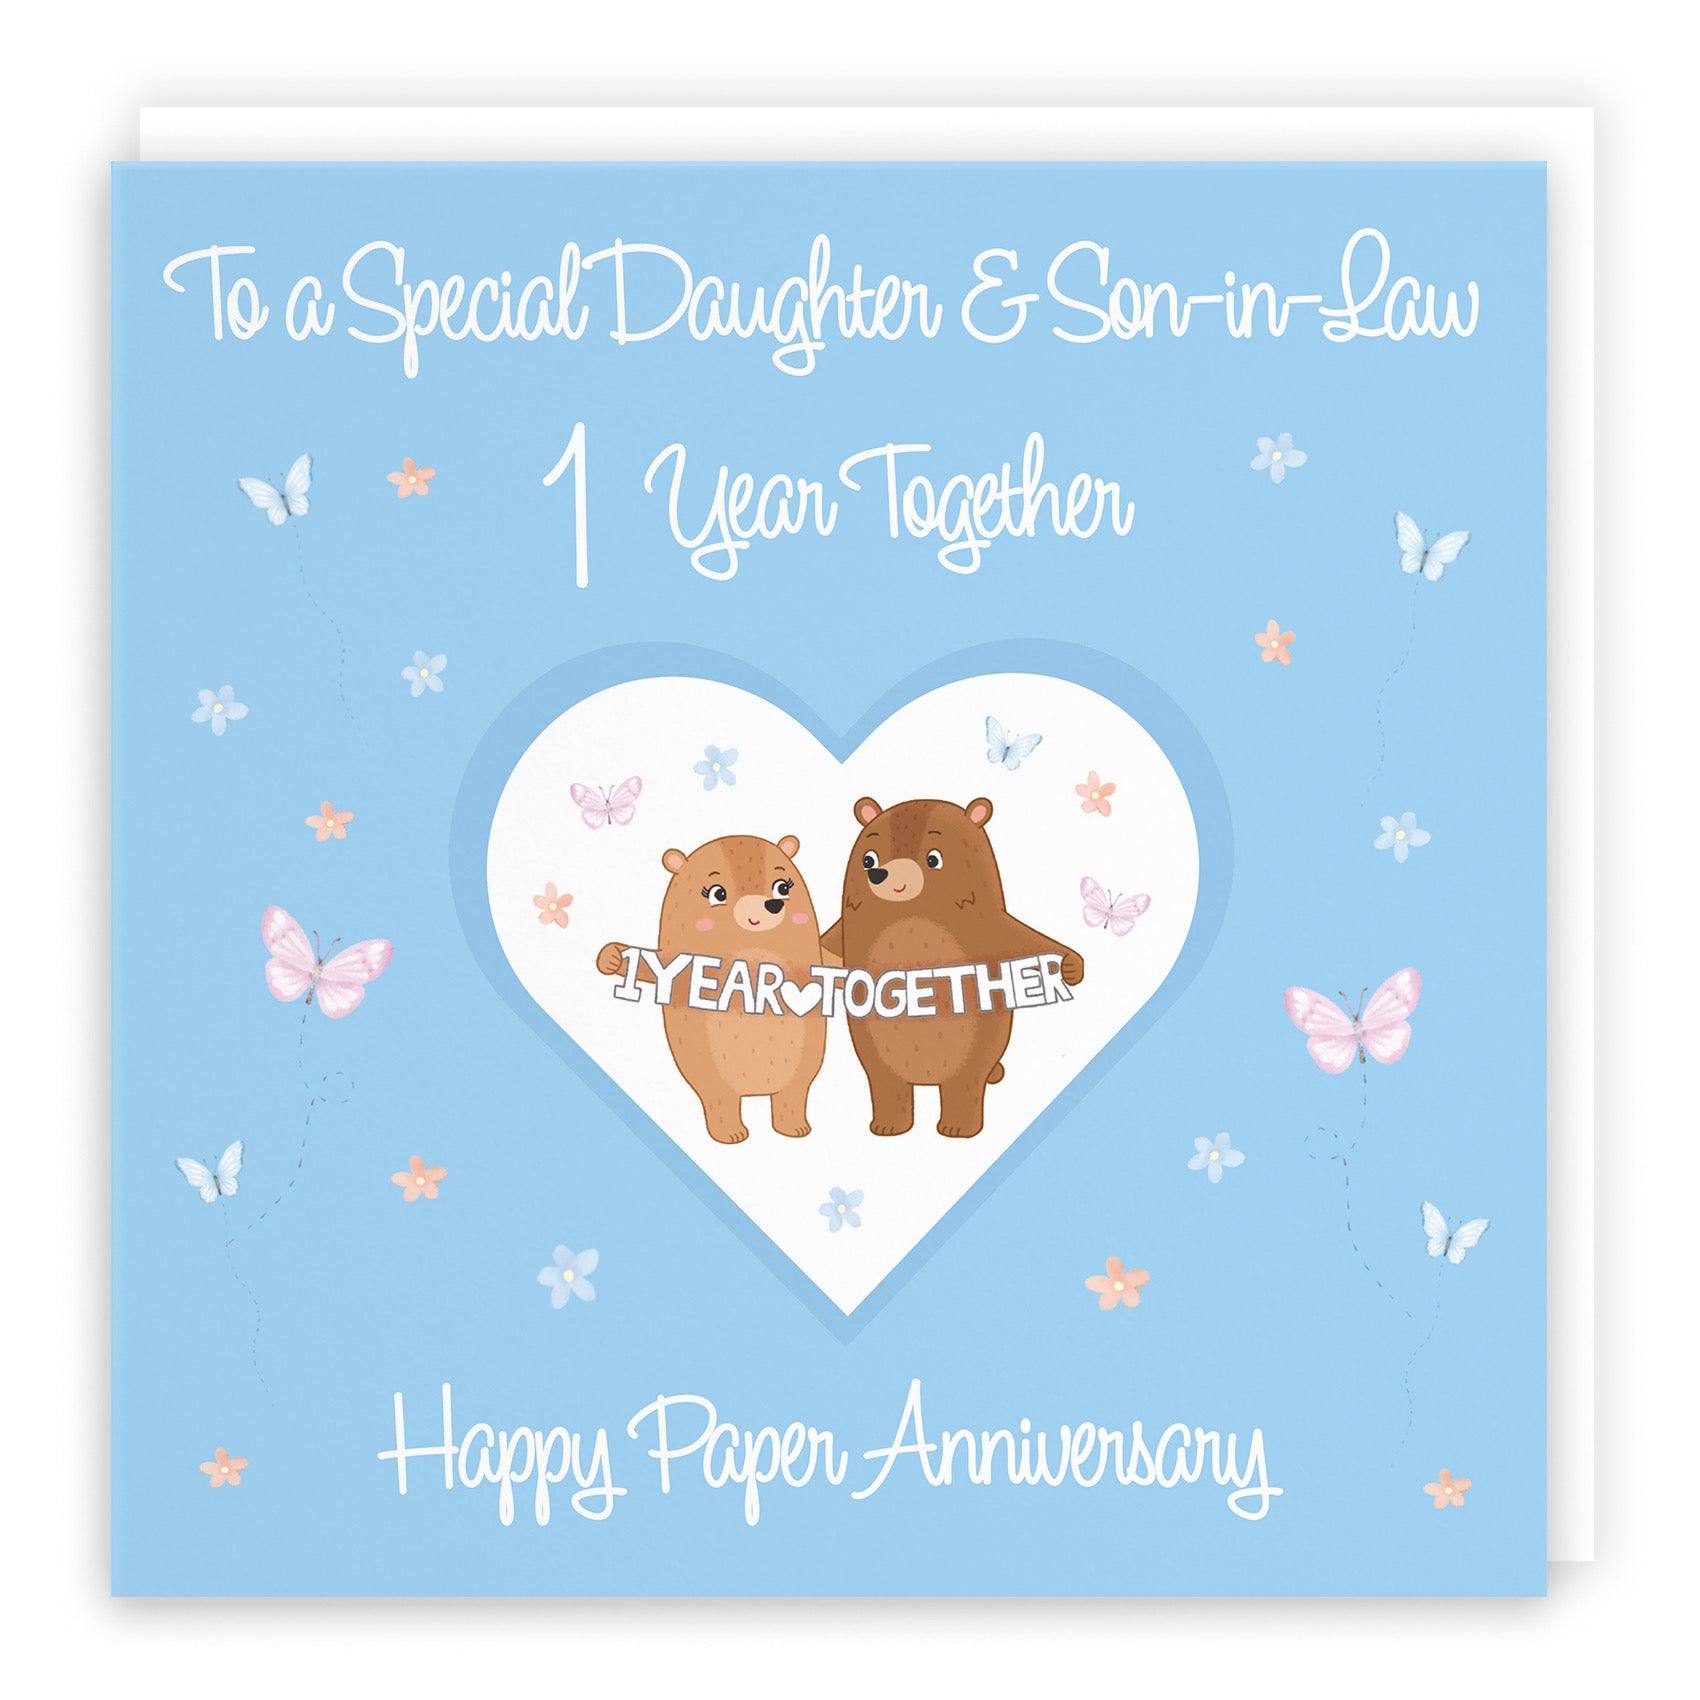 Large Daughter & Son-in-Law 1st Anniversary Card Romantic Meadows - Default Title (B0CXY41NP9)